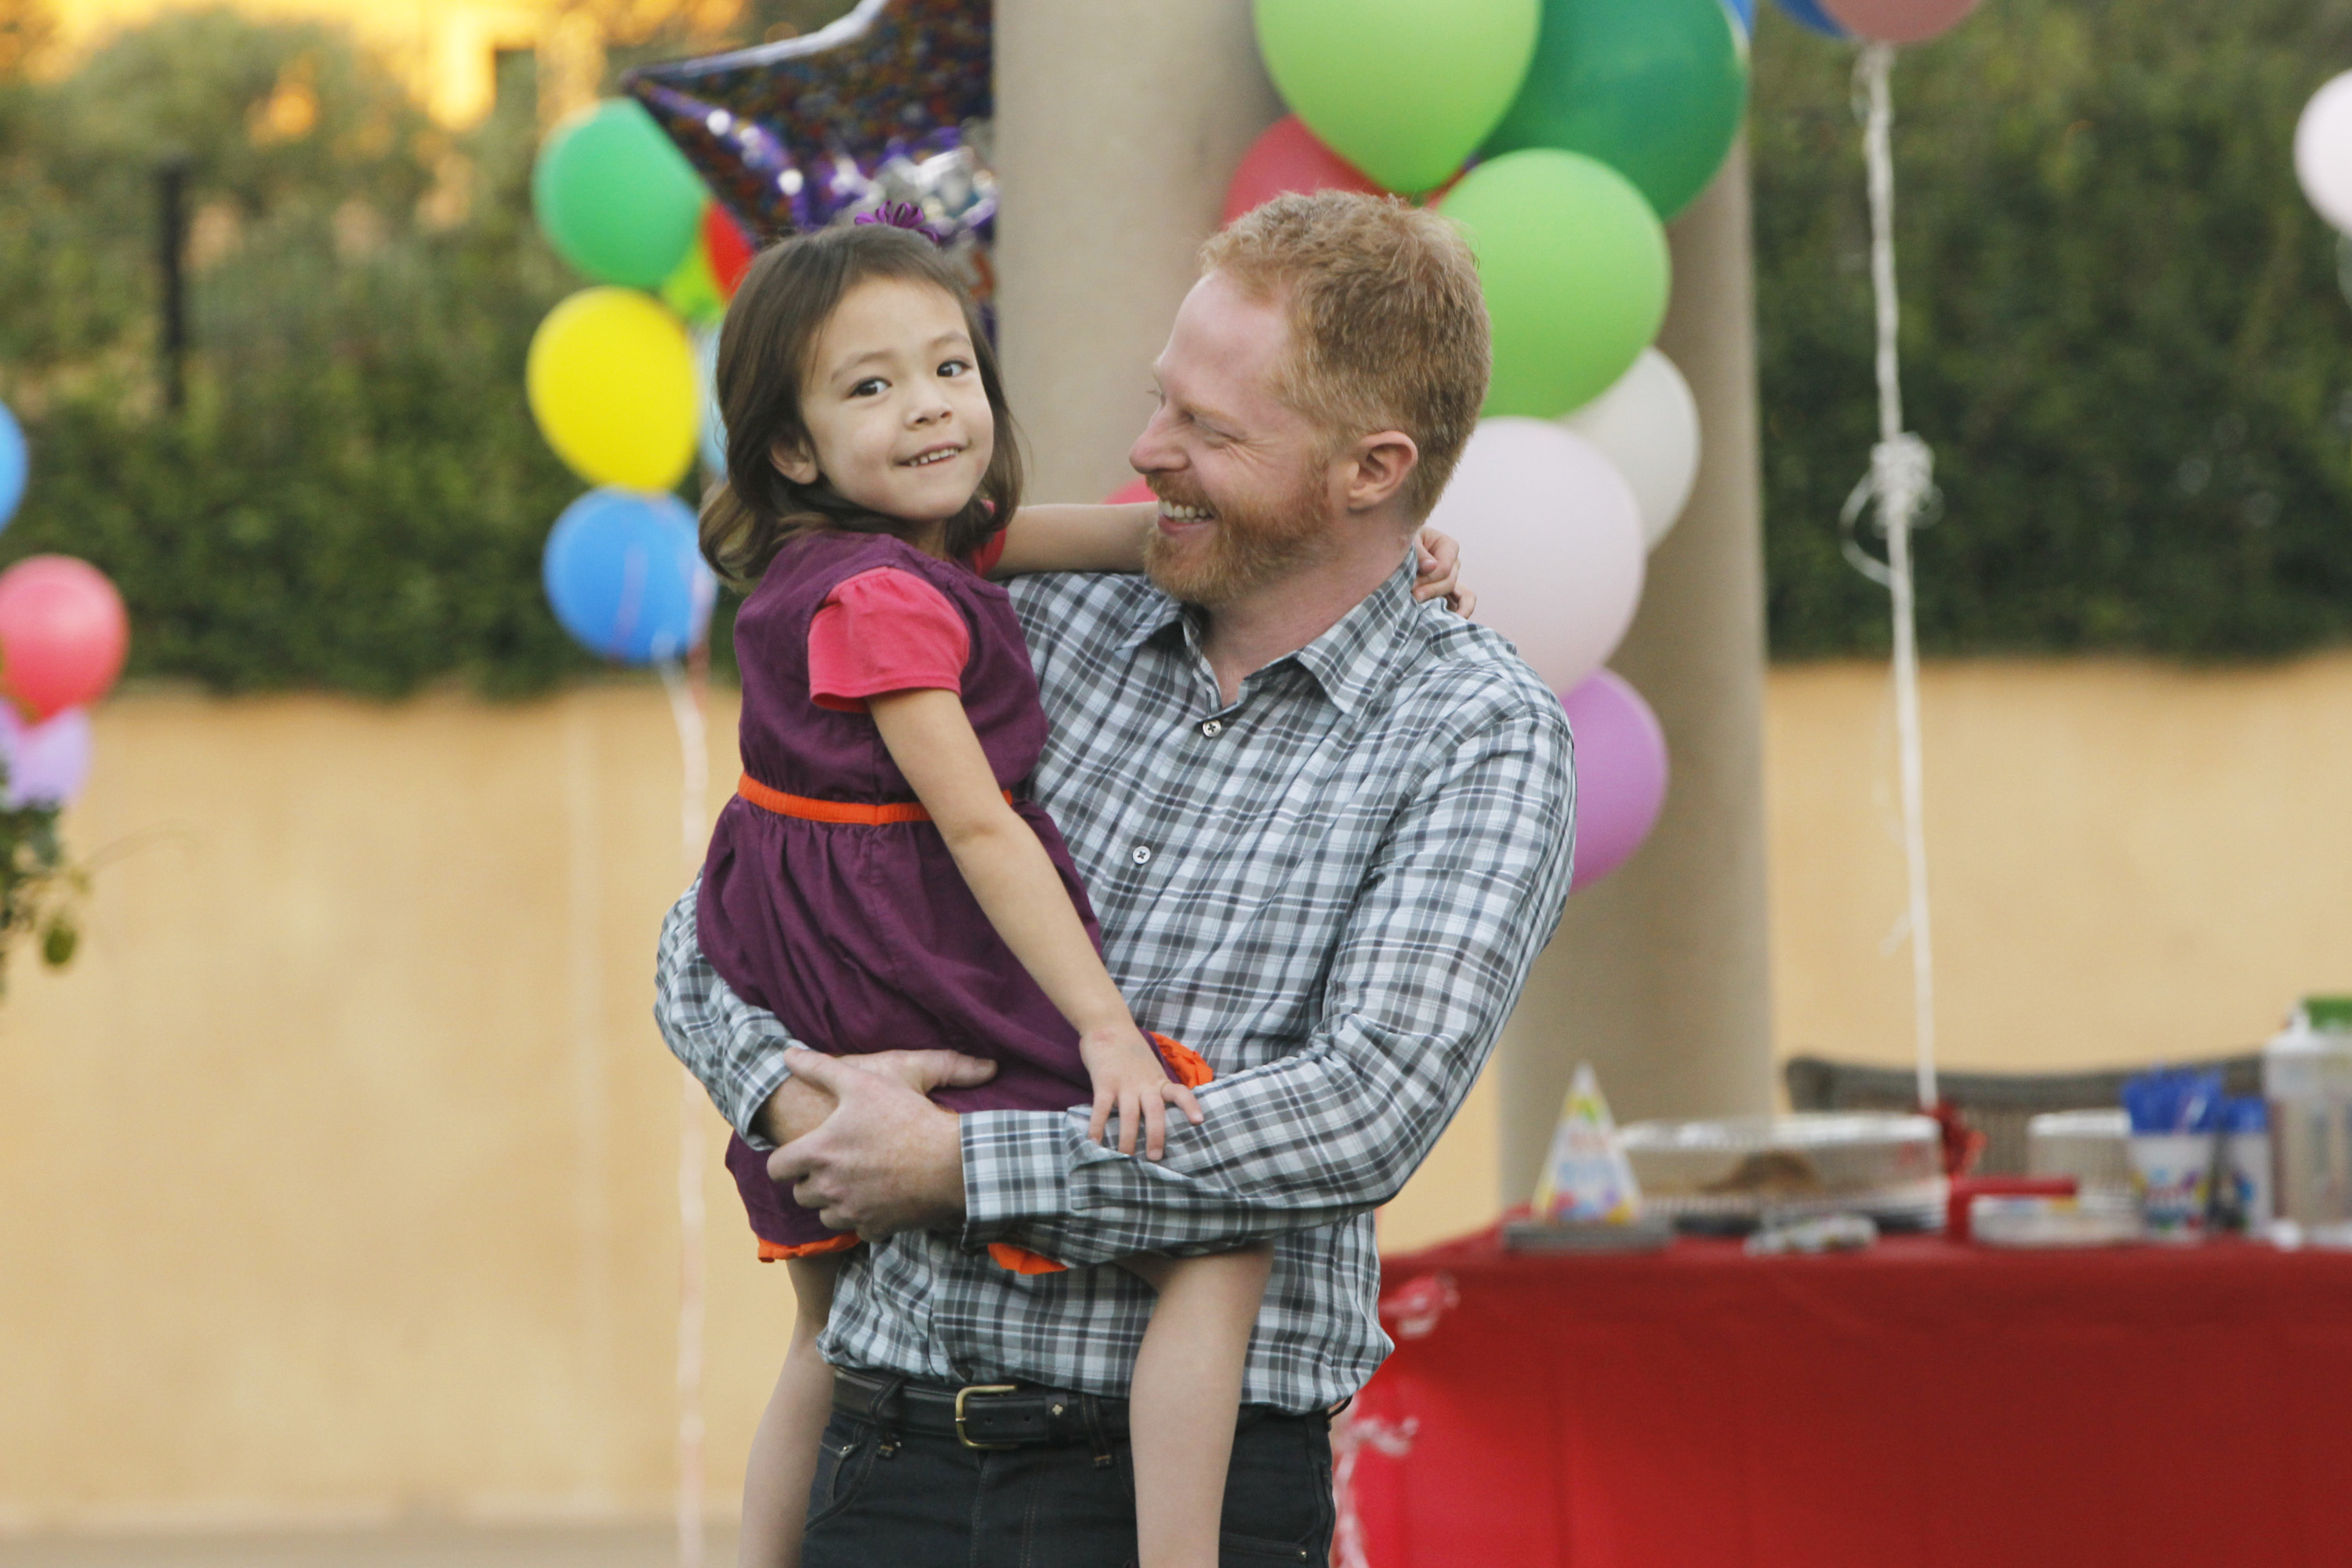 Aubrey and Jesse in a season 3 still from the show in front of a table full of balloons